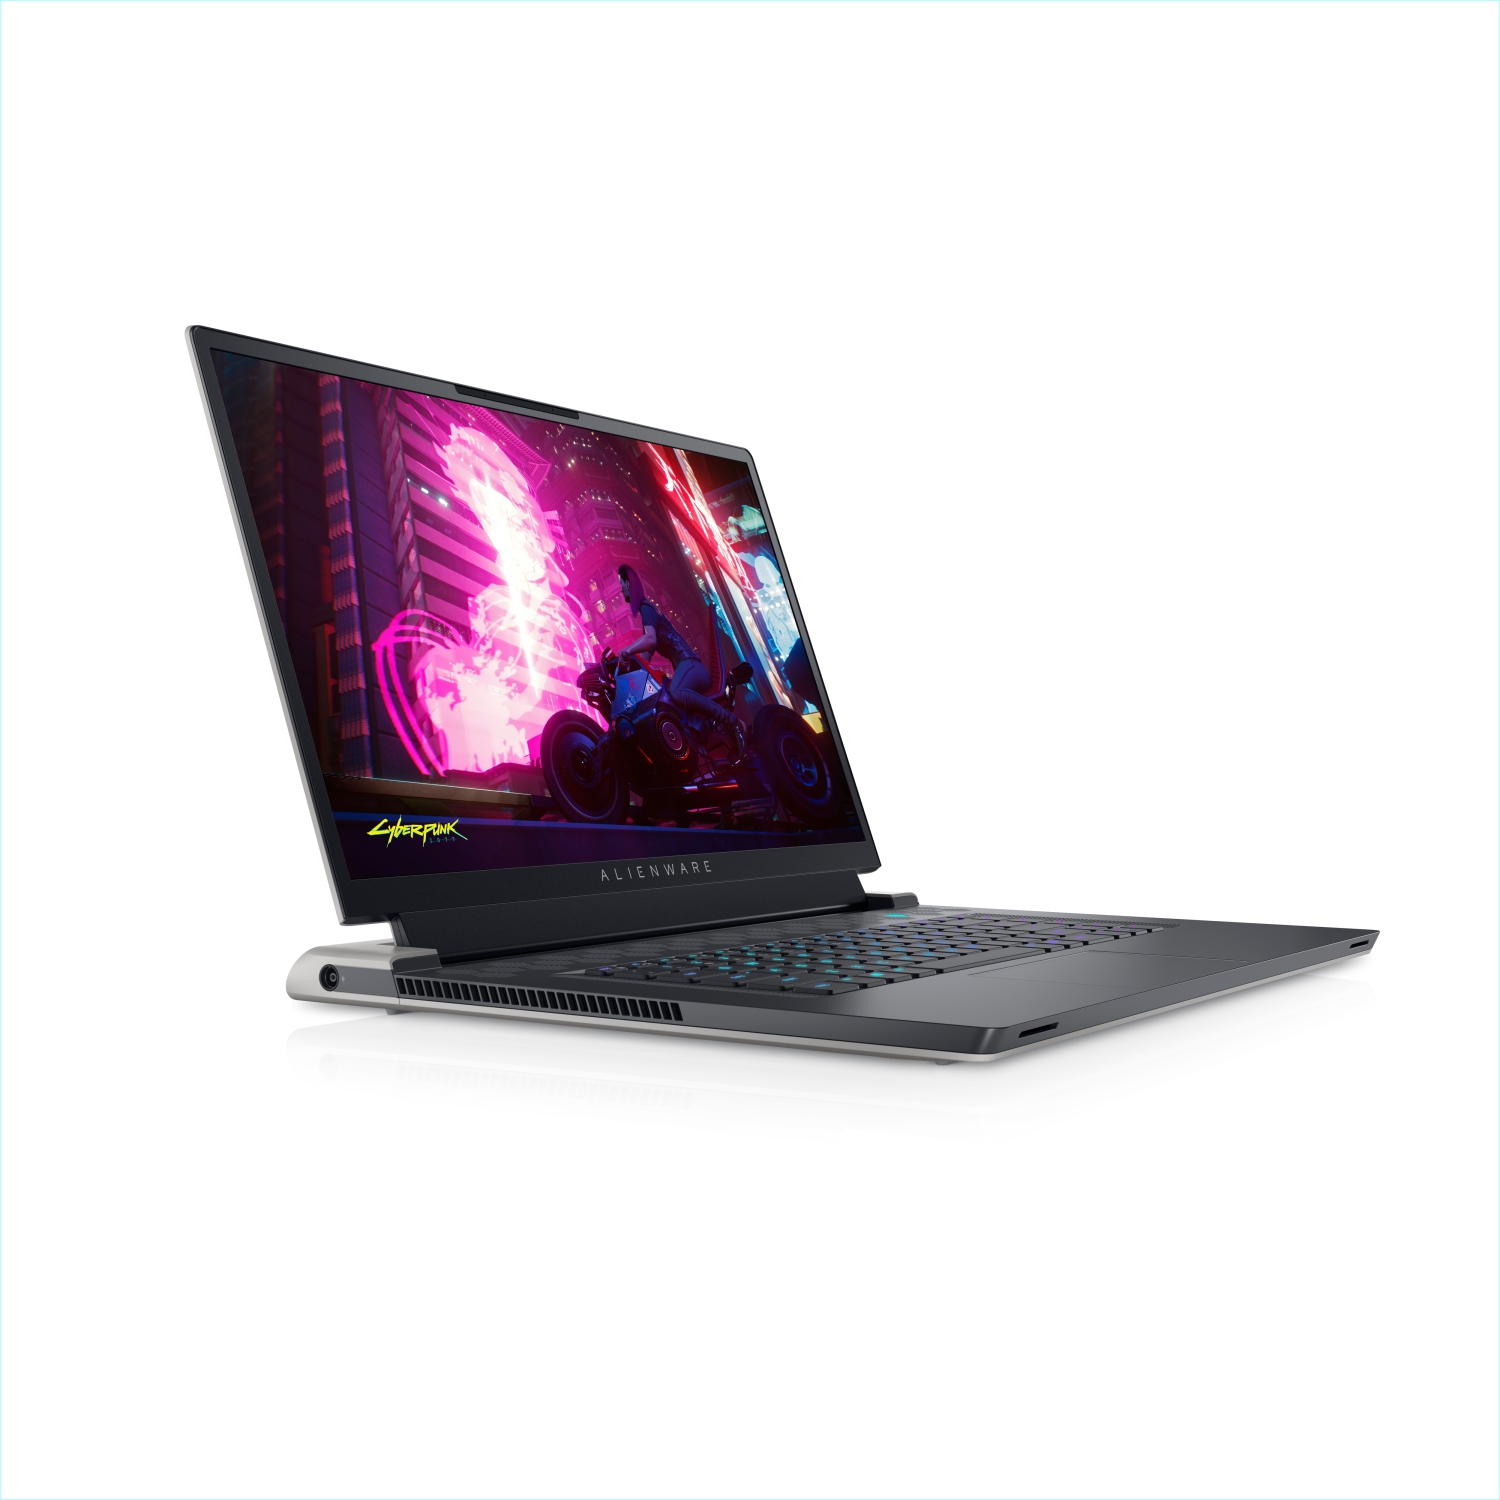 Refurbished (Excellent) - Dell Alienware X17 R1 Gaming Laptop (2021), 17.3" 4K, Core i9, 1TB SSD + 512GB SSD, 64GB RAM, RTX 3080, 5 GHz, 11th Gen CPU Certified